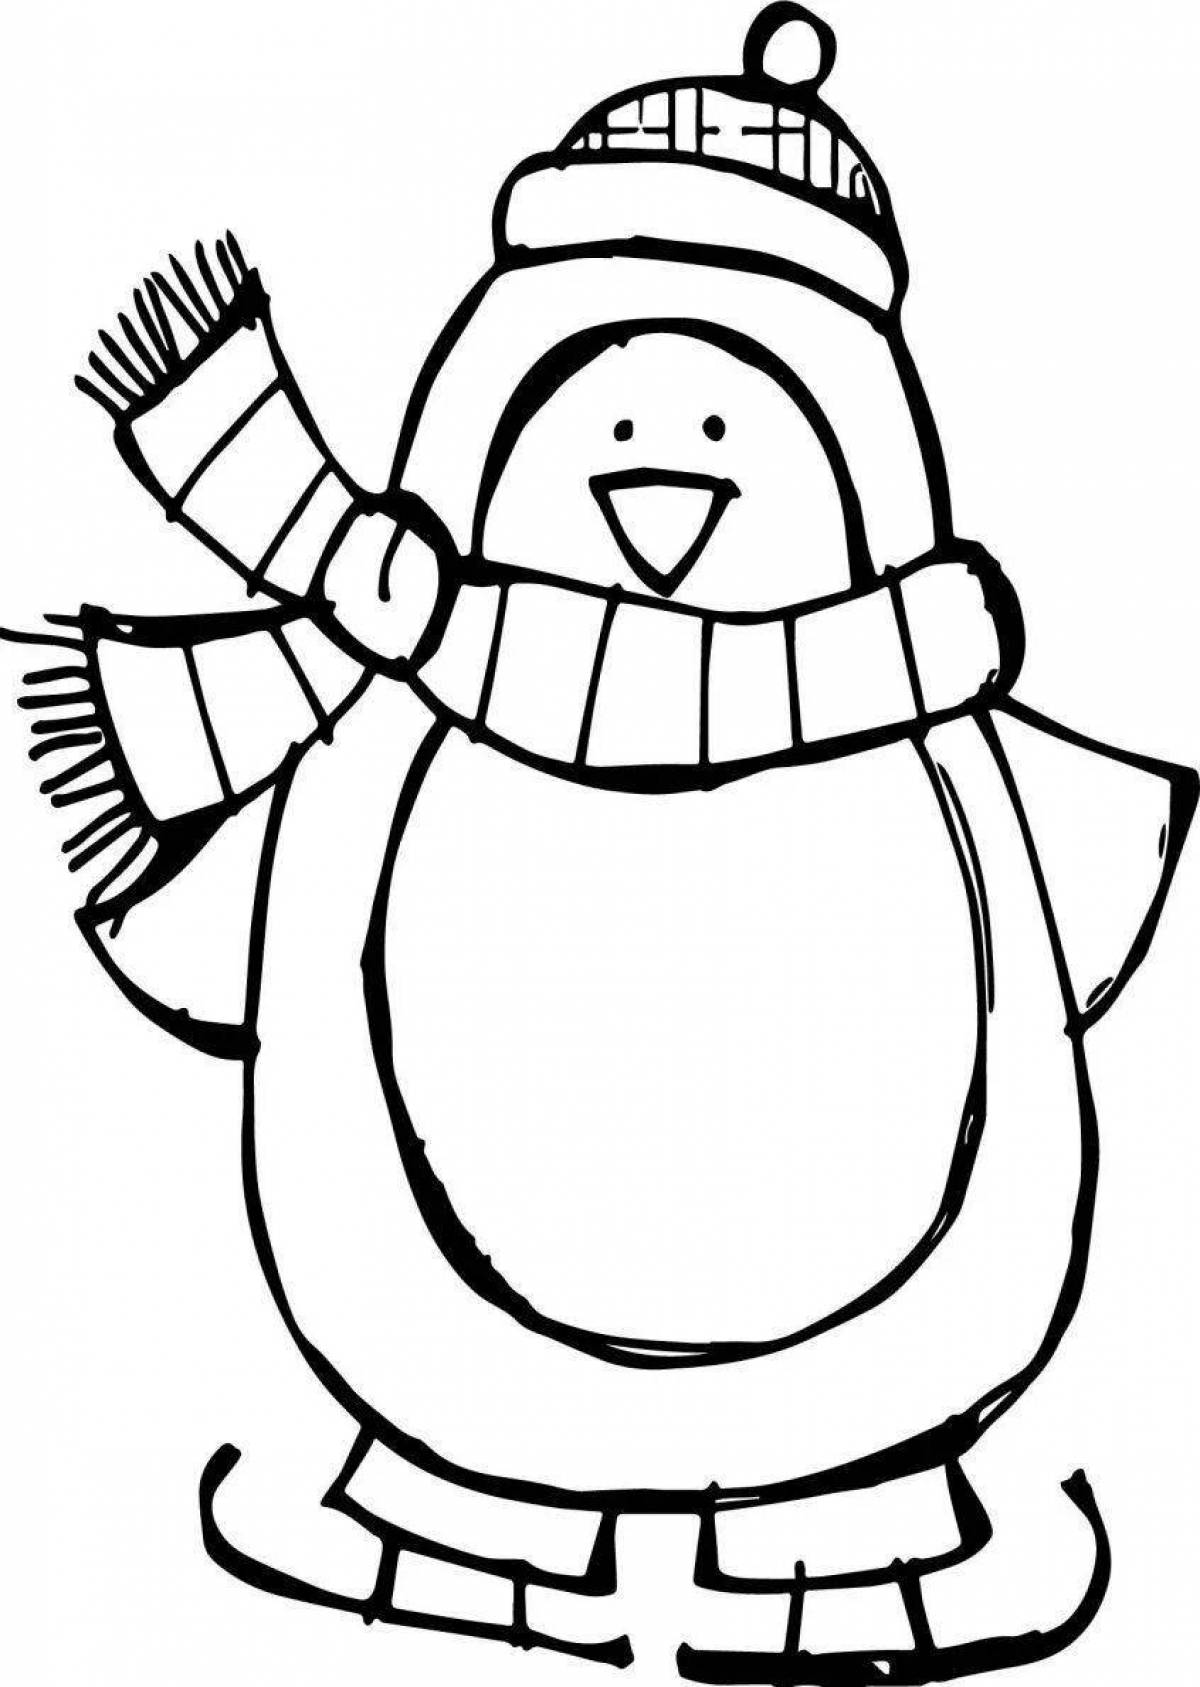 Coloring page bright christmas penguin